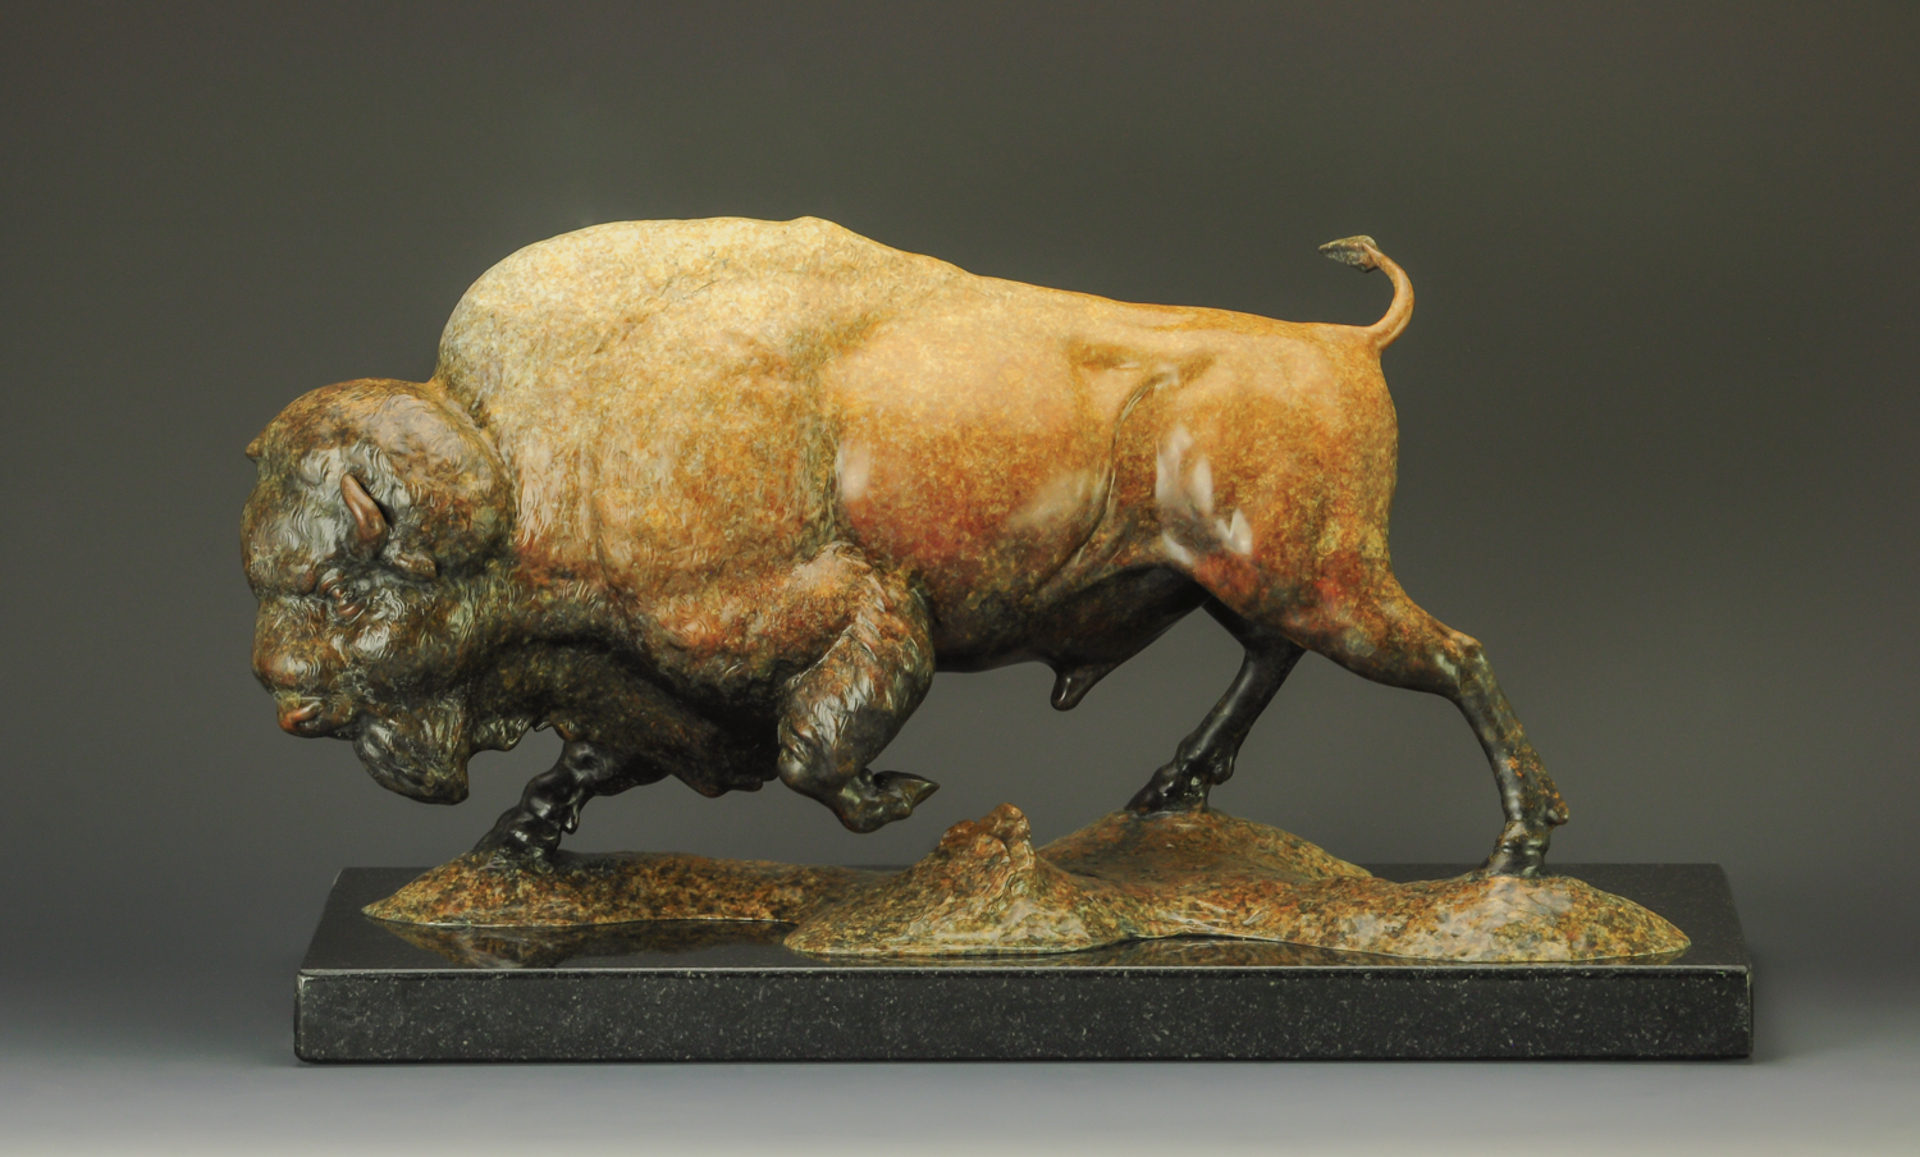 A Fine Art Sculpture In Bronze By Jeremy Bradshaw Featuring A Charging Bison, Available At Gallery Wild